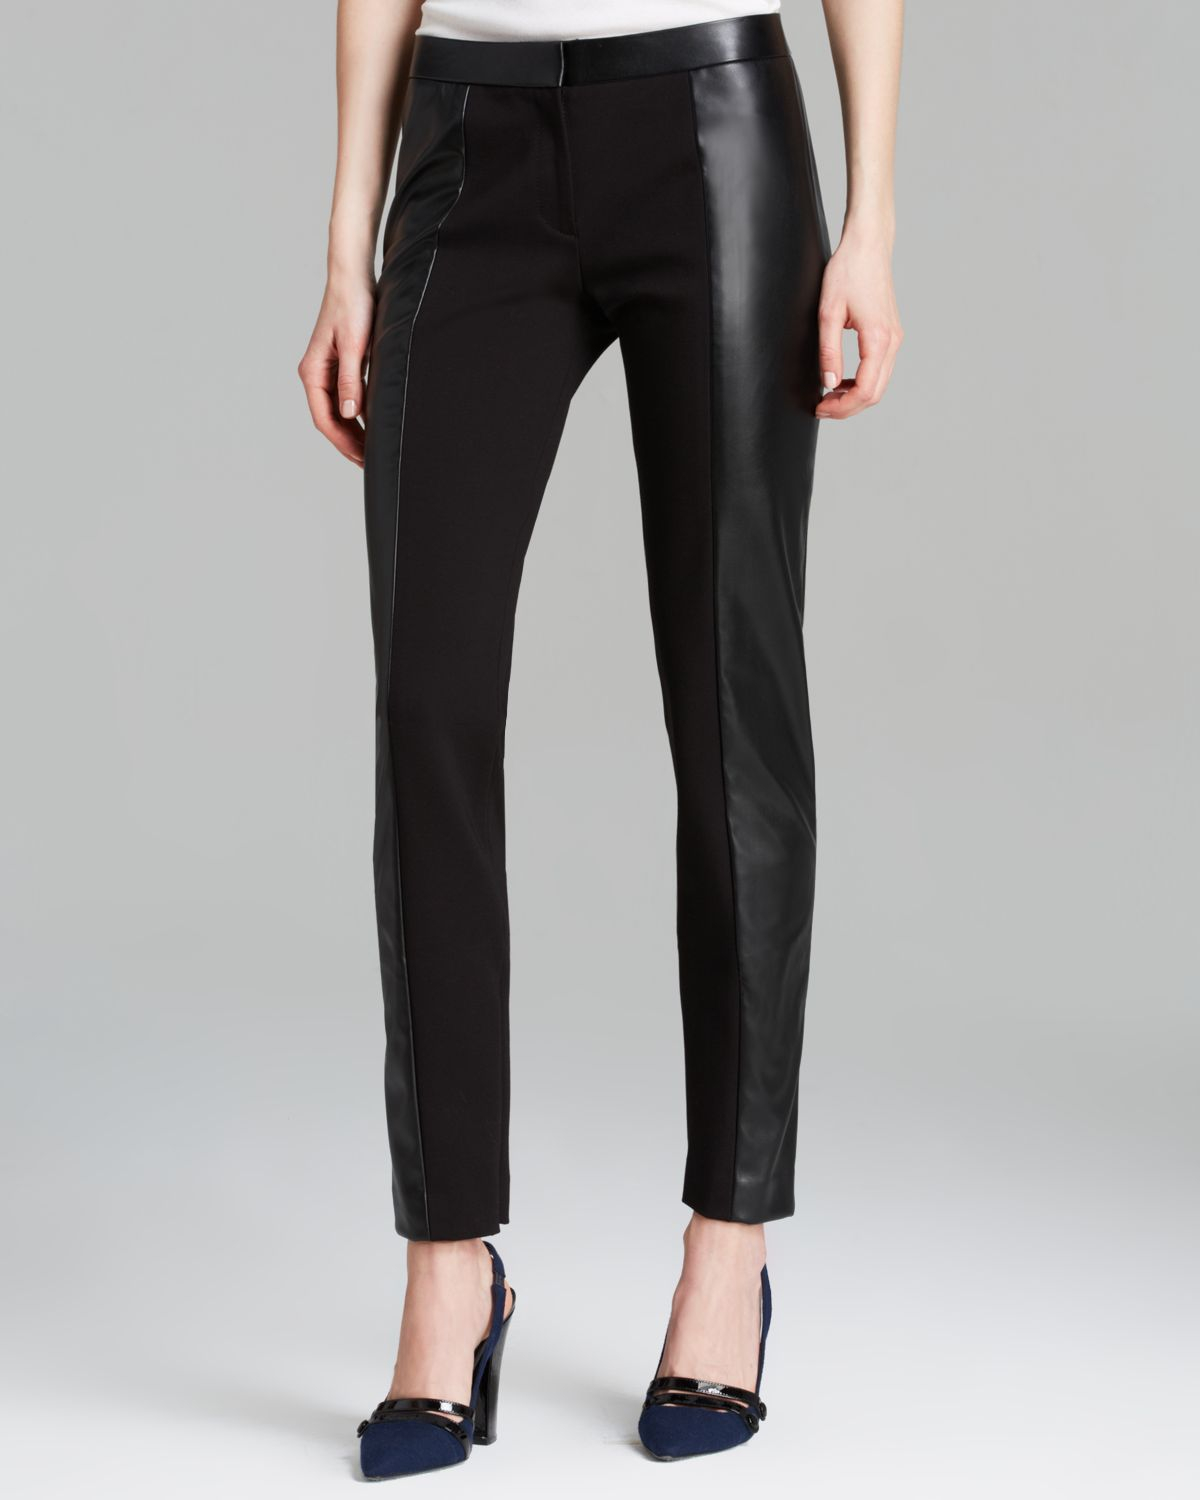 Tory Burch Mabley Faux Leather Pants in Black - Lyst